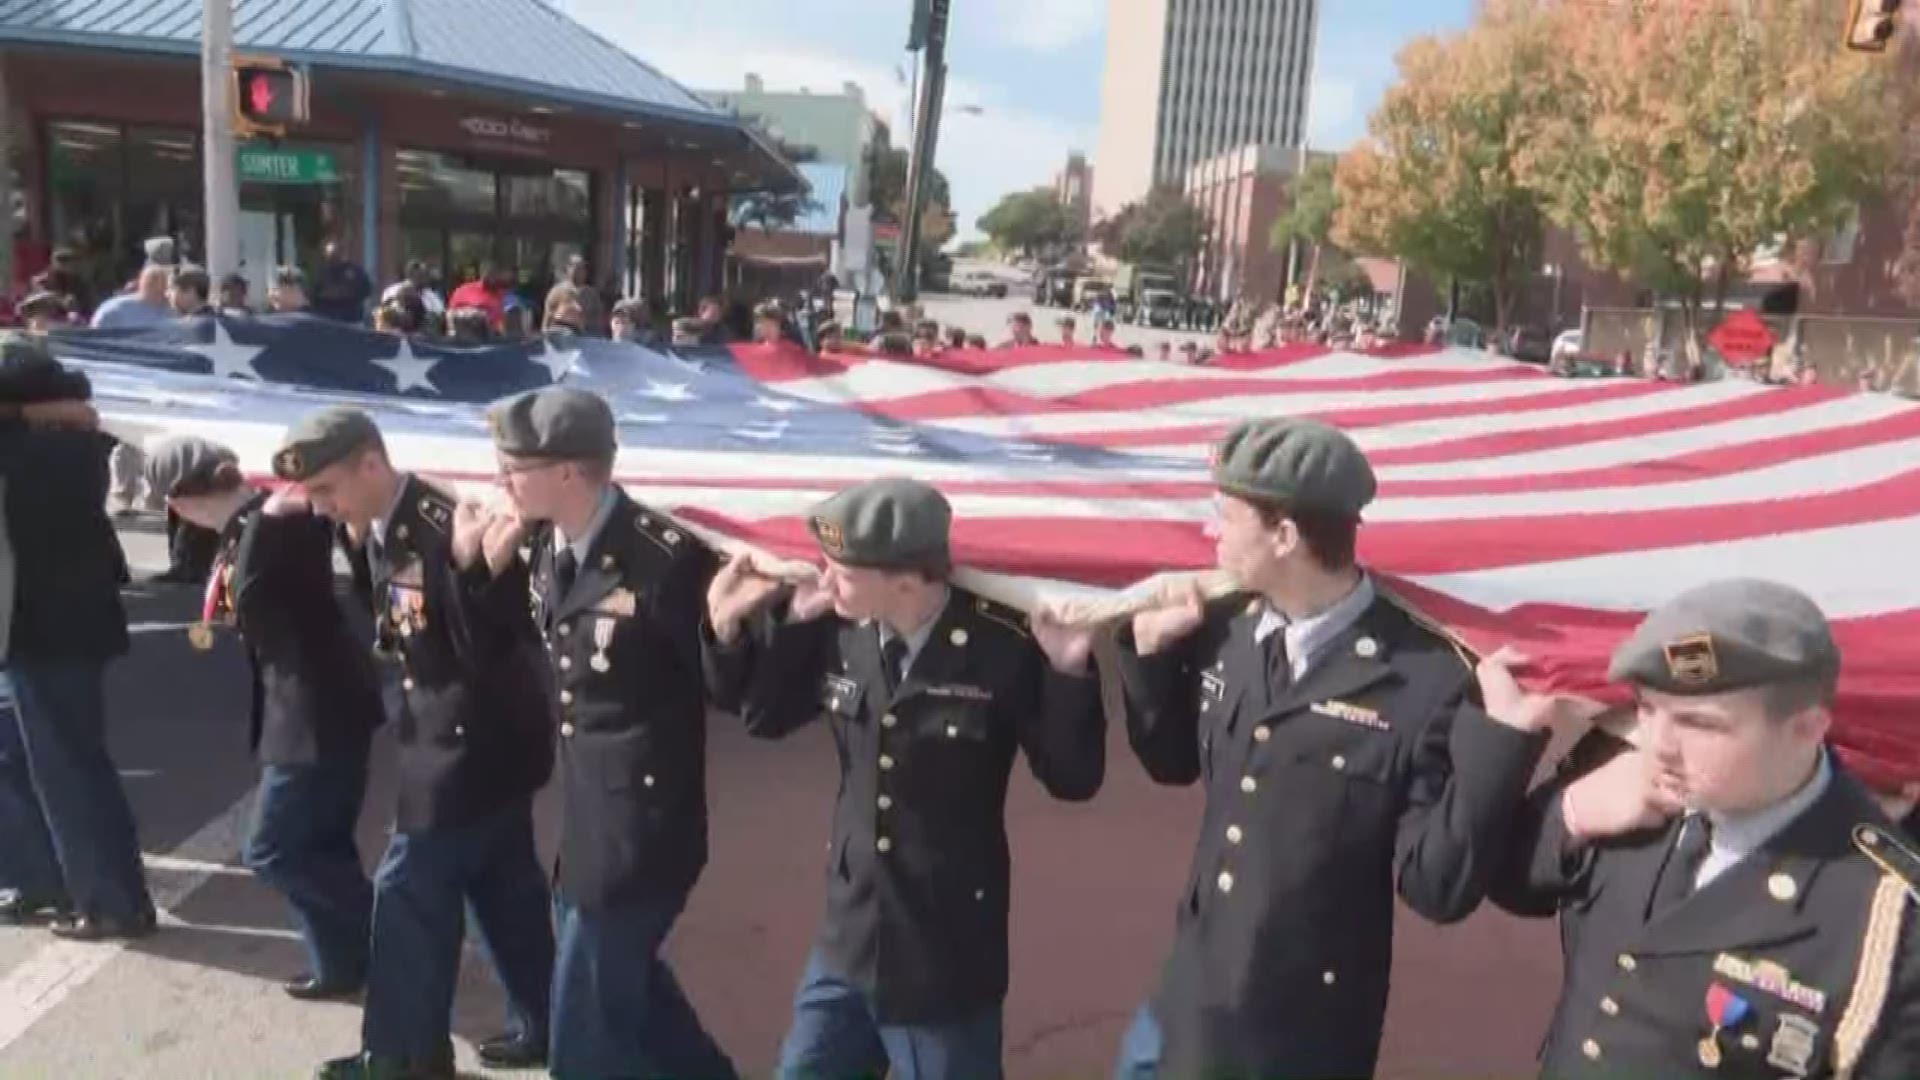 The 2019 Veterans Day Parade was held in Columbia, South Carolina on Monday, November 11.